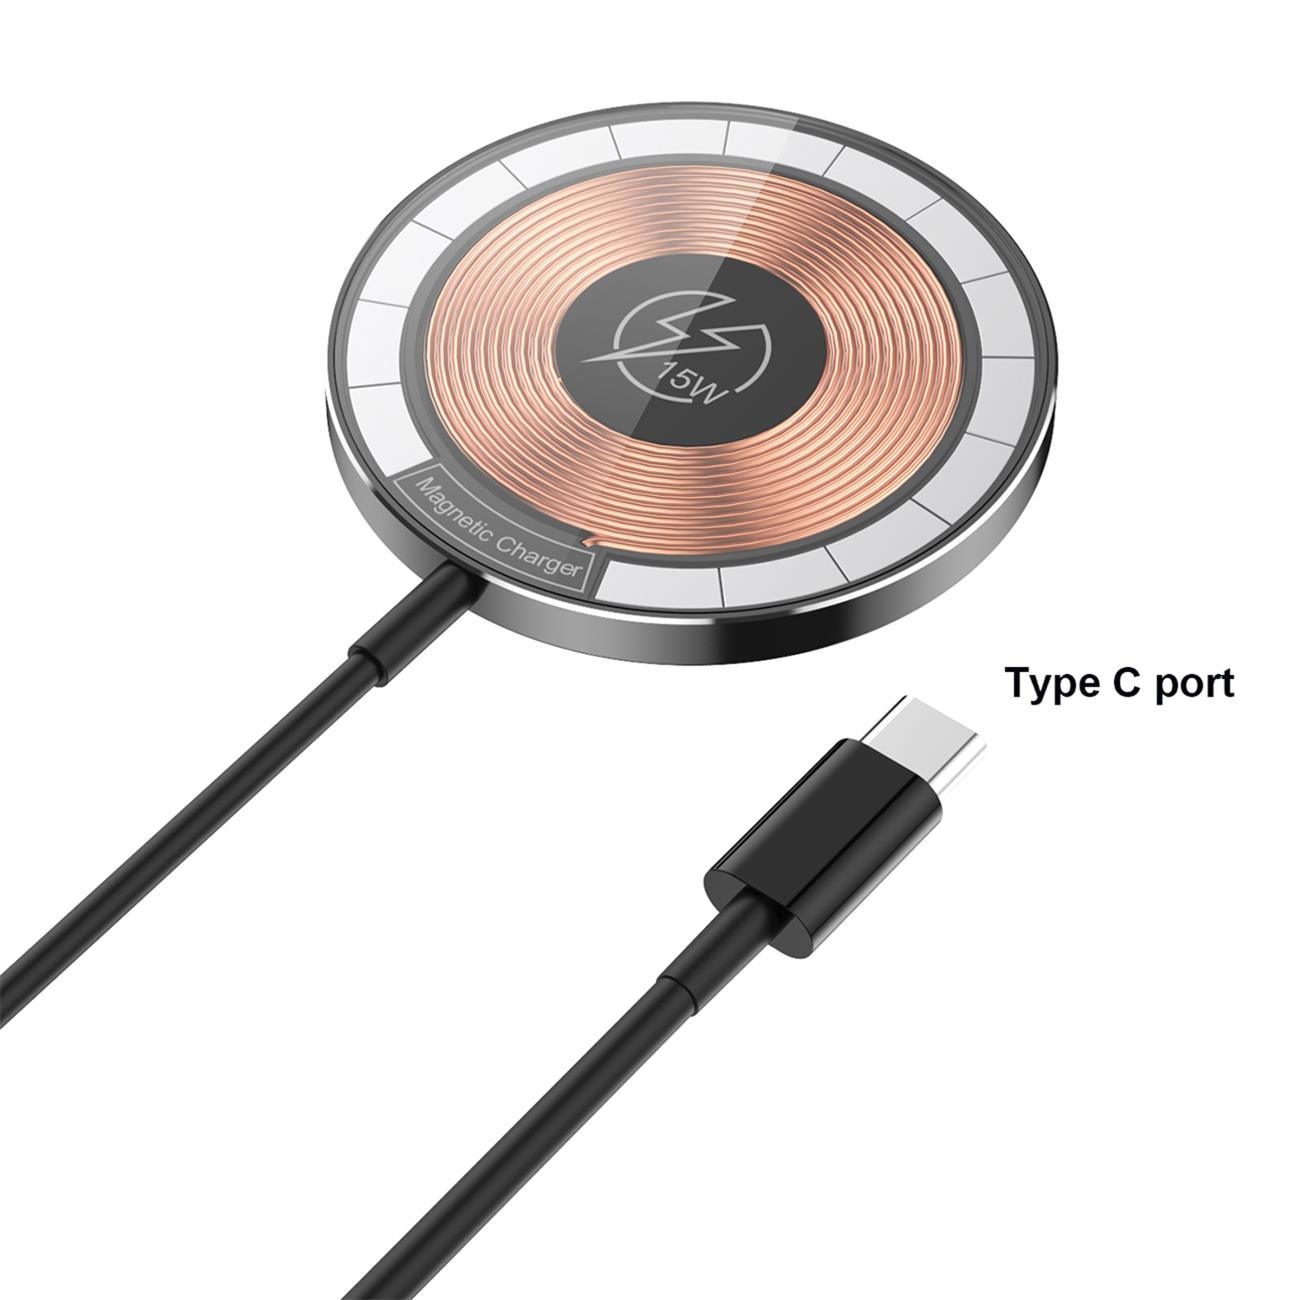 Magnetic Wireless Charger Super Slim 15w Fast Charge For Smart Phone